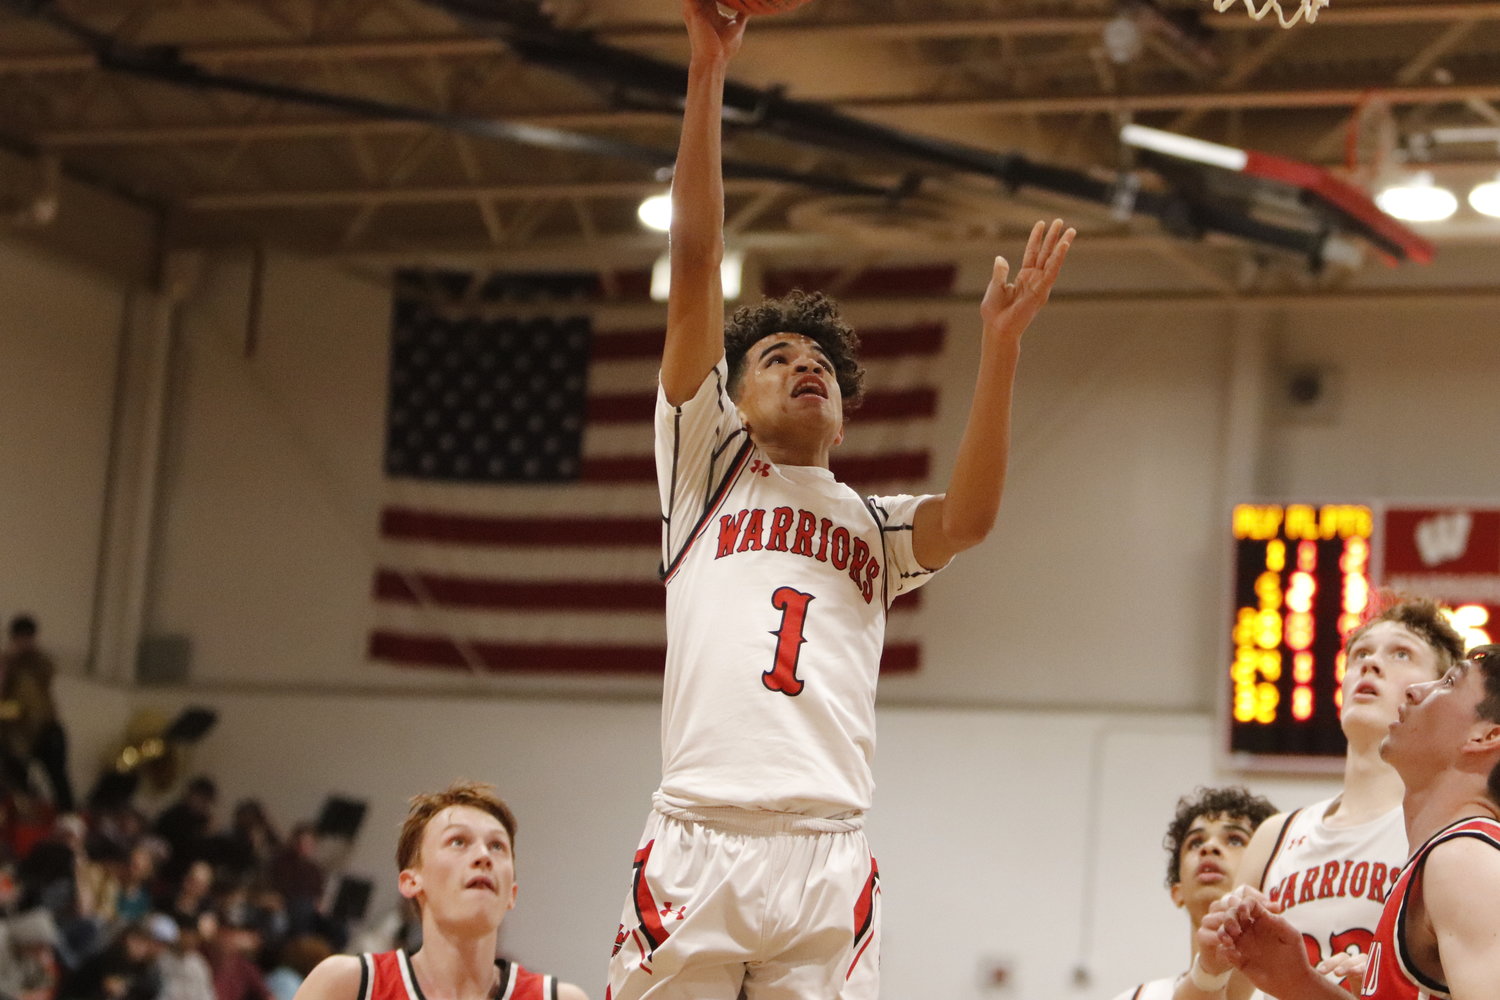 Deacon Forrest scores two of his four points during Tuesday’s conference win over Winfield.